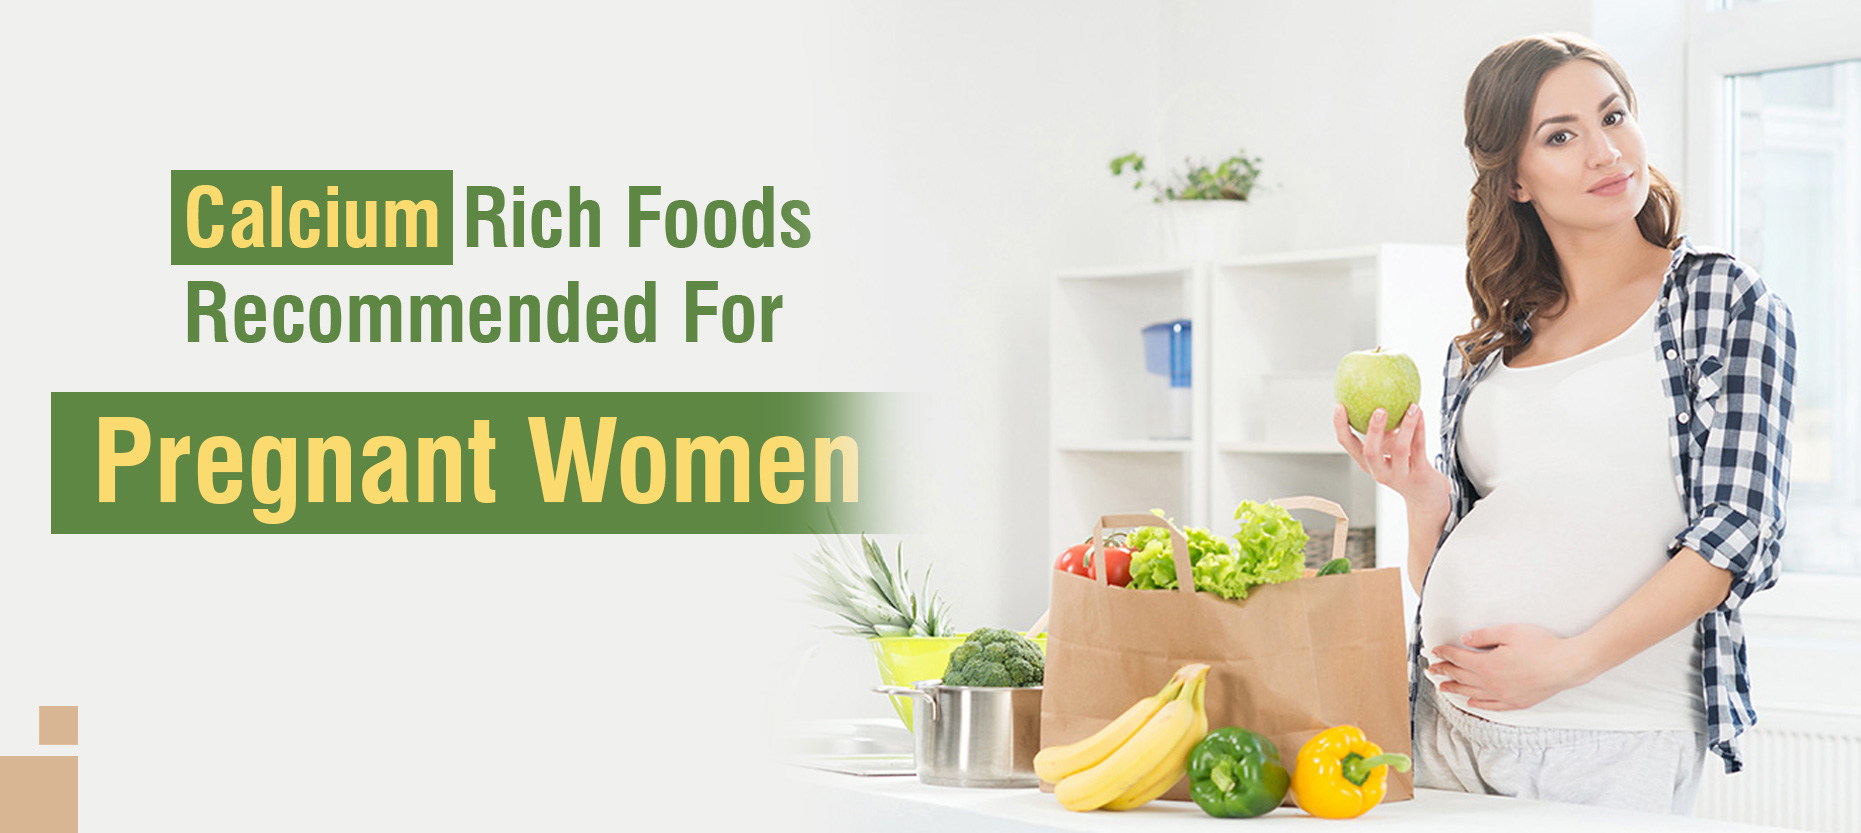 Calcium-Rich Foods Recommended for Pregnant Women